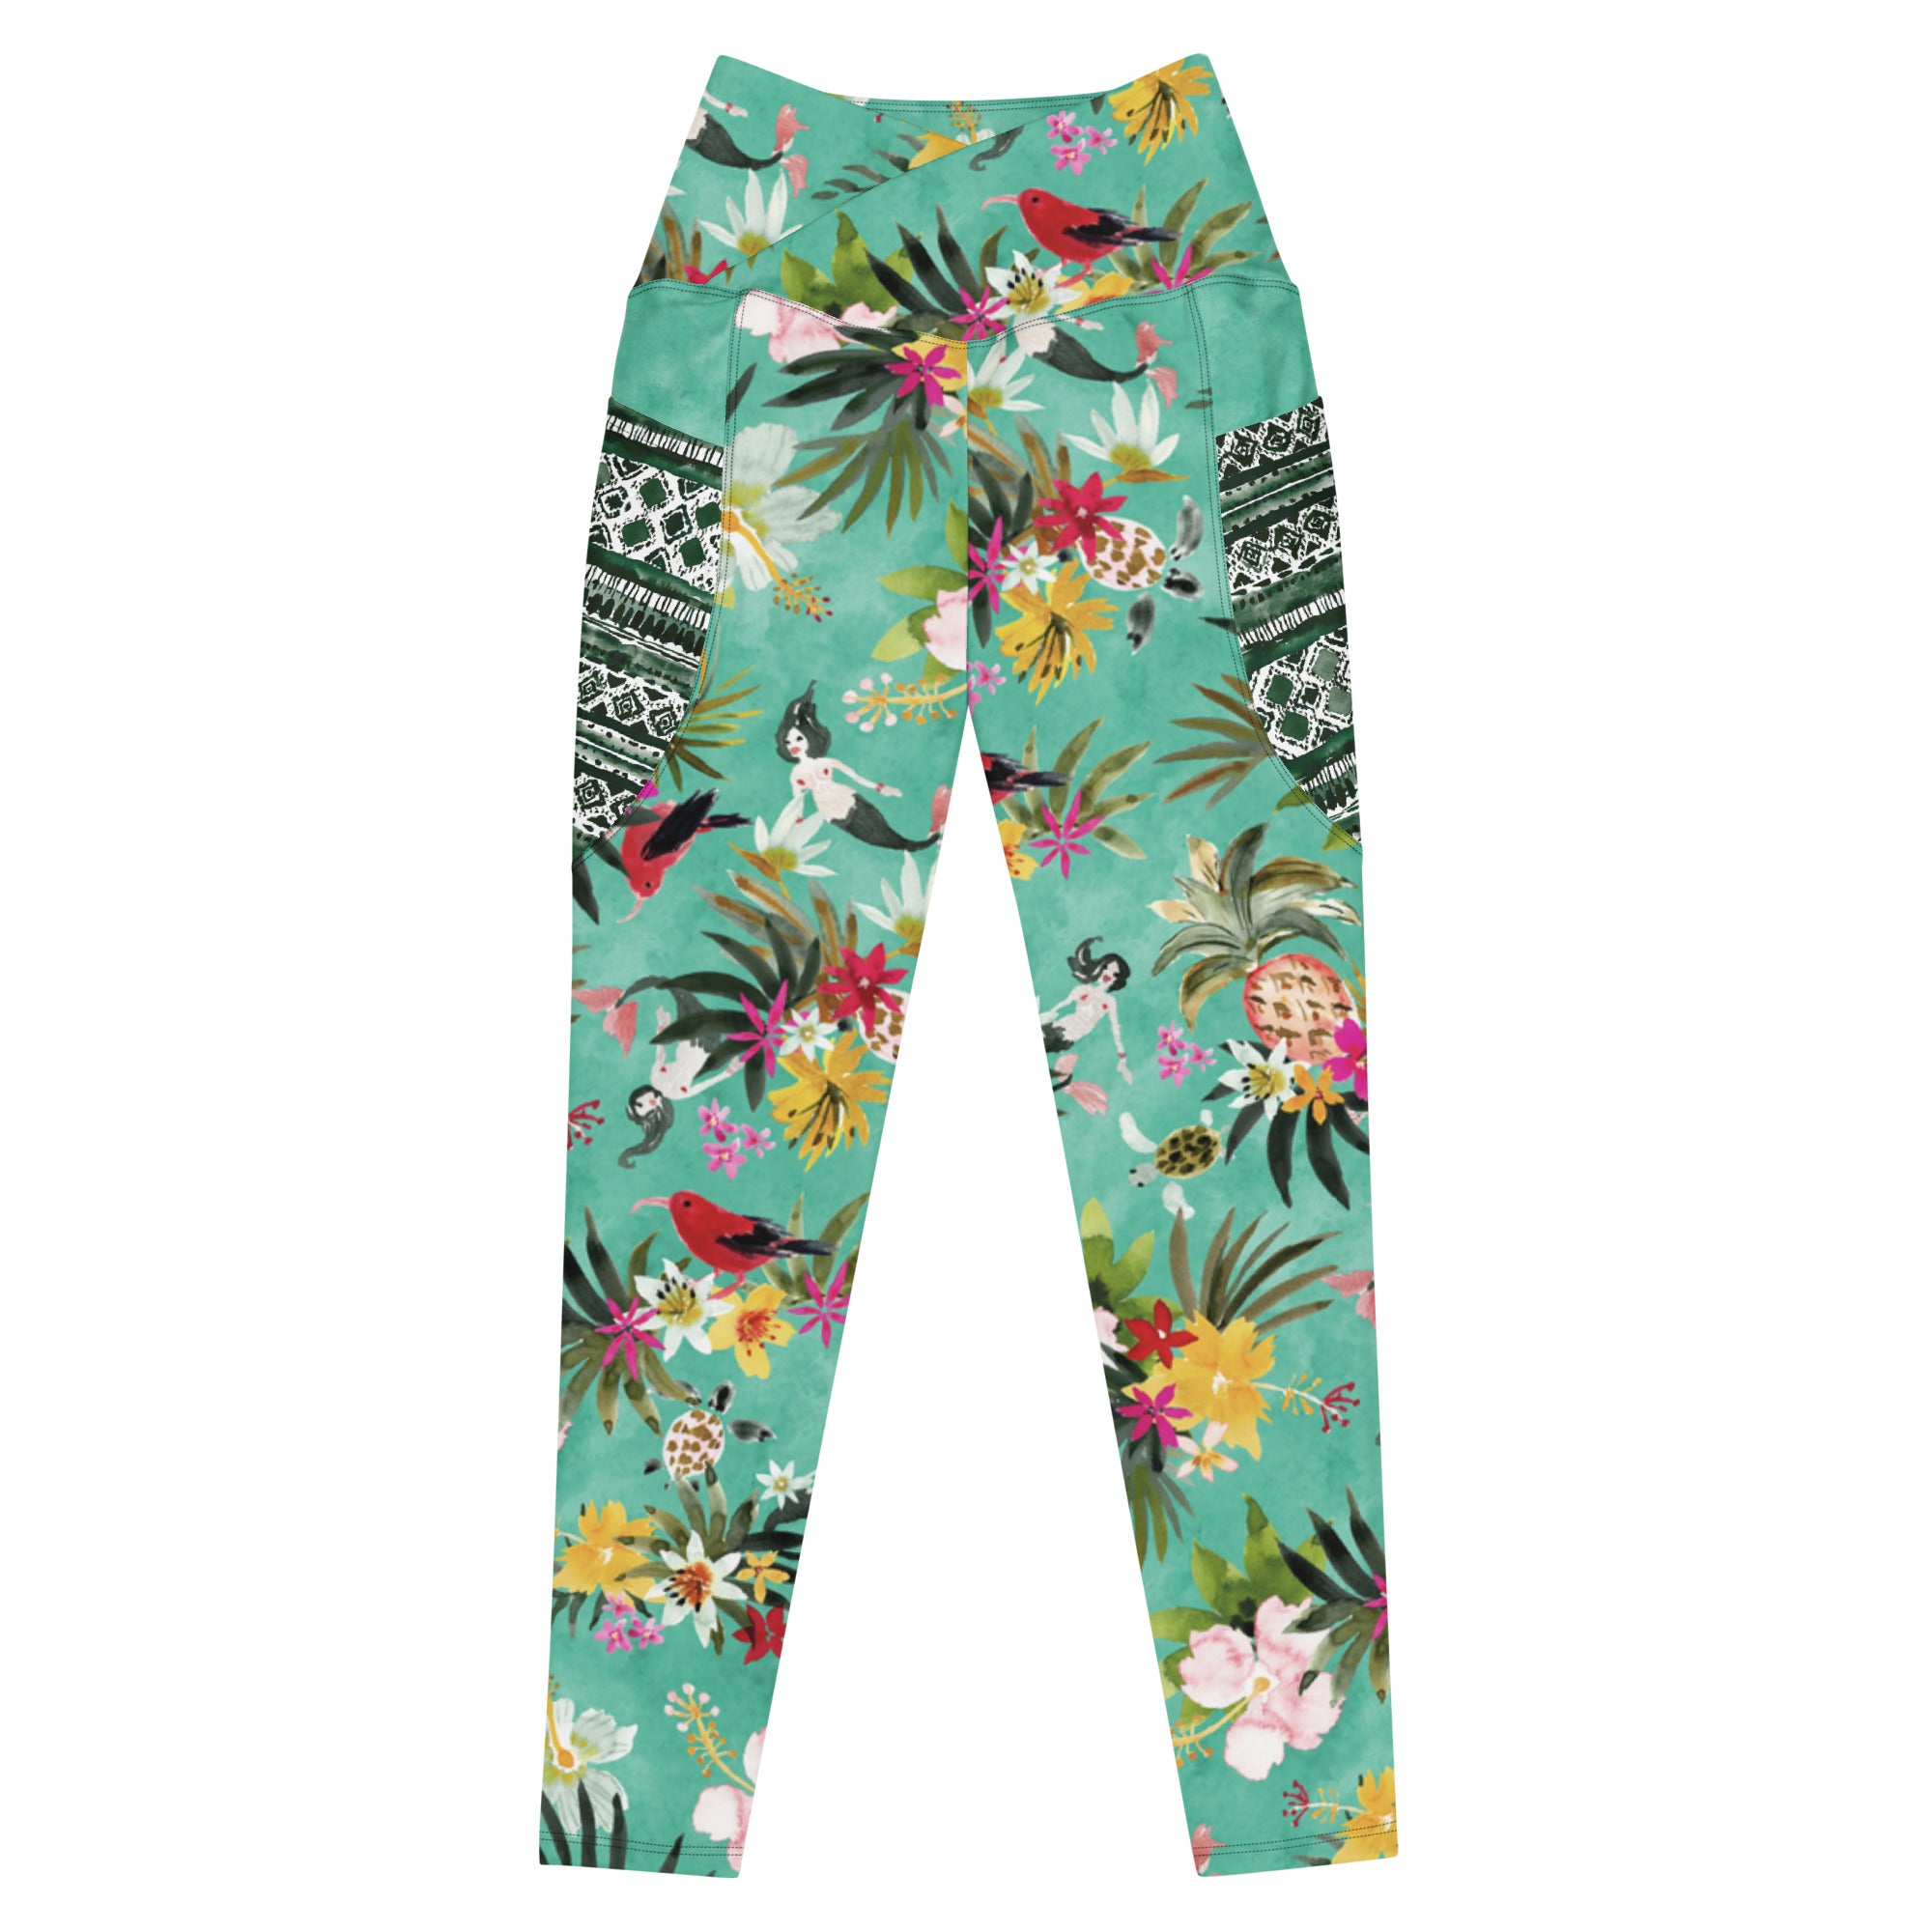 HONOLULU BOUND Crossover Leggings with Pockets